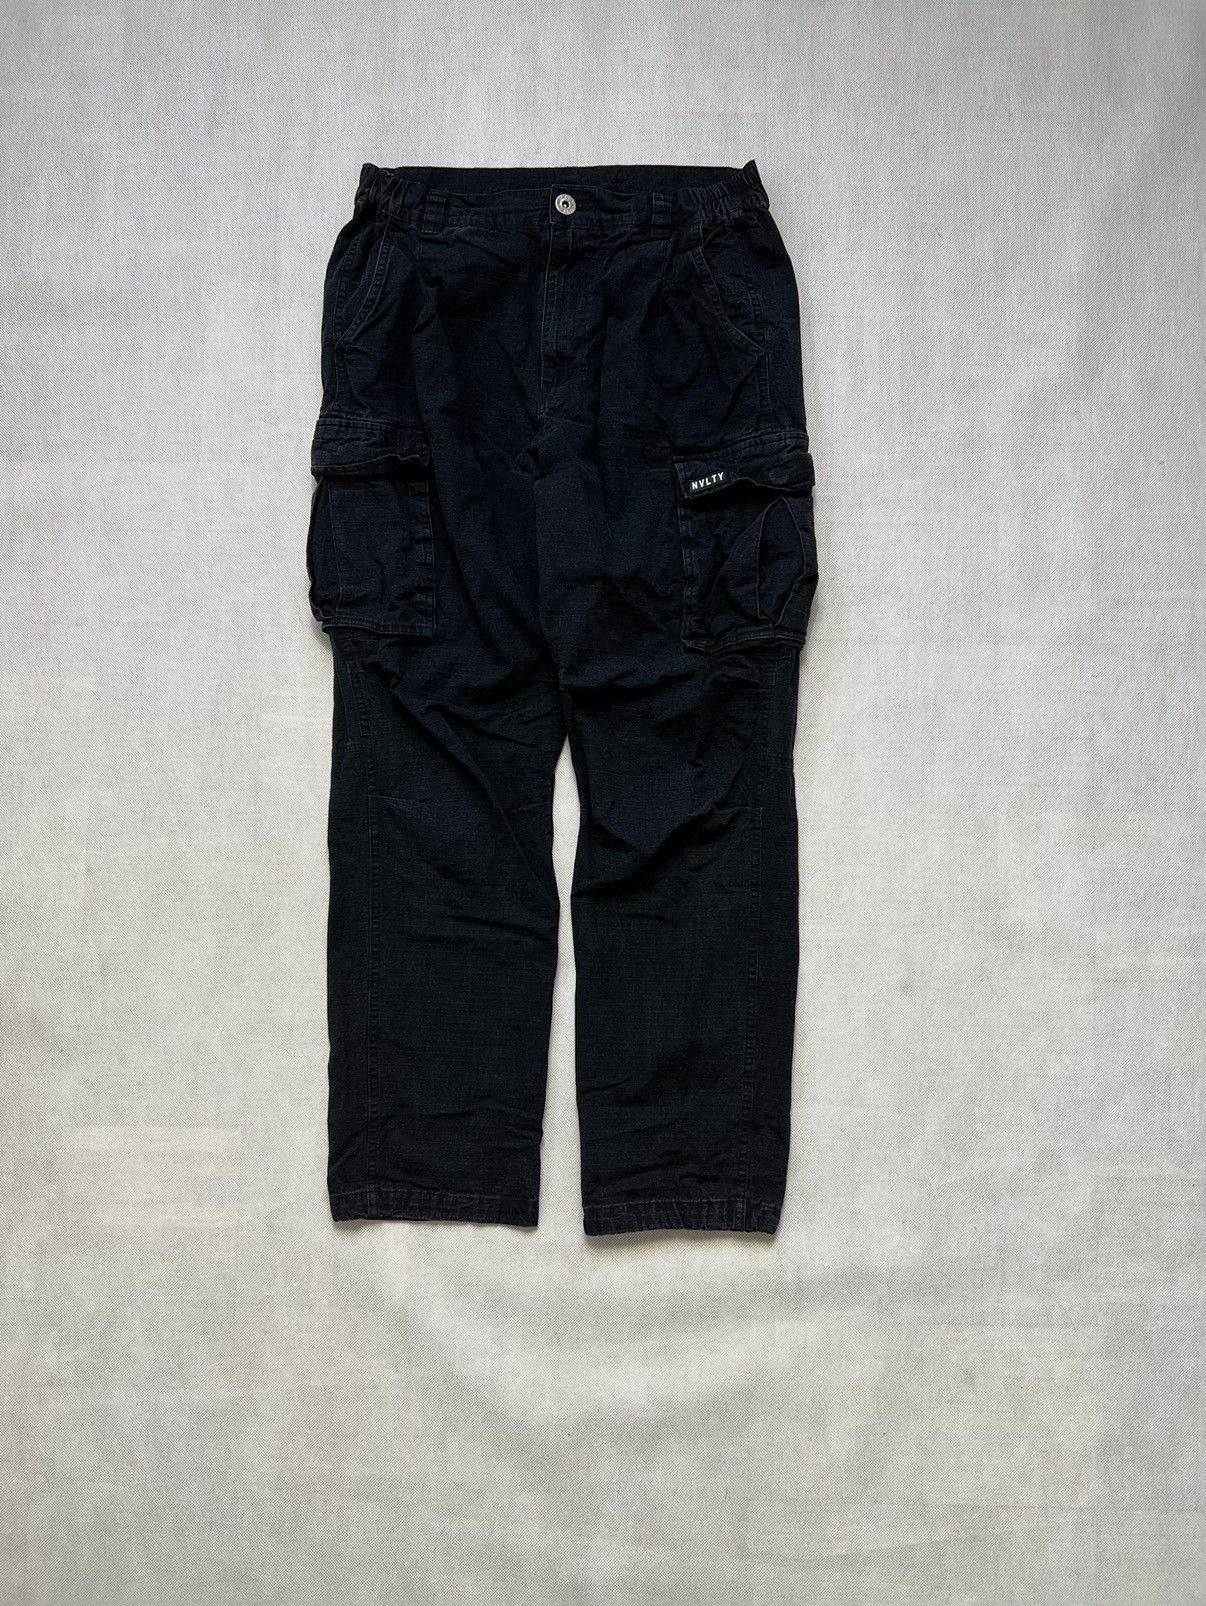 NVLTY Trousers NVLTY cargo pants logo | Grailed